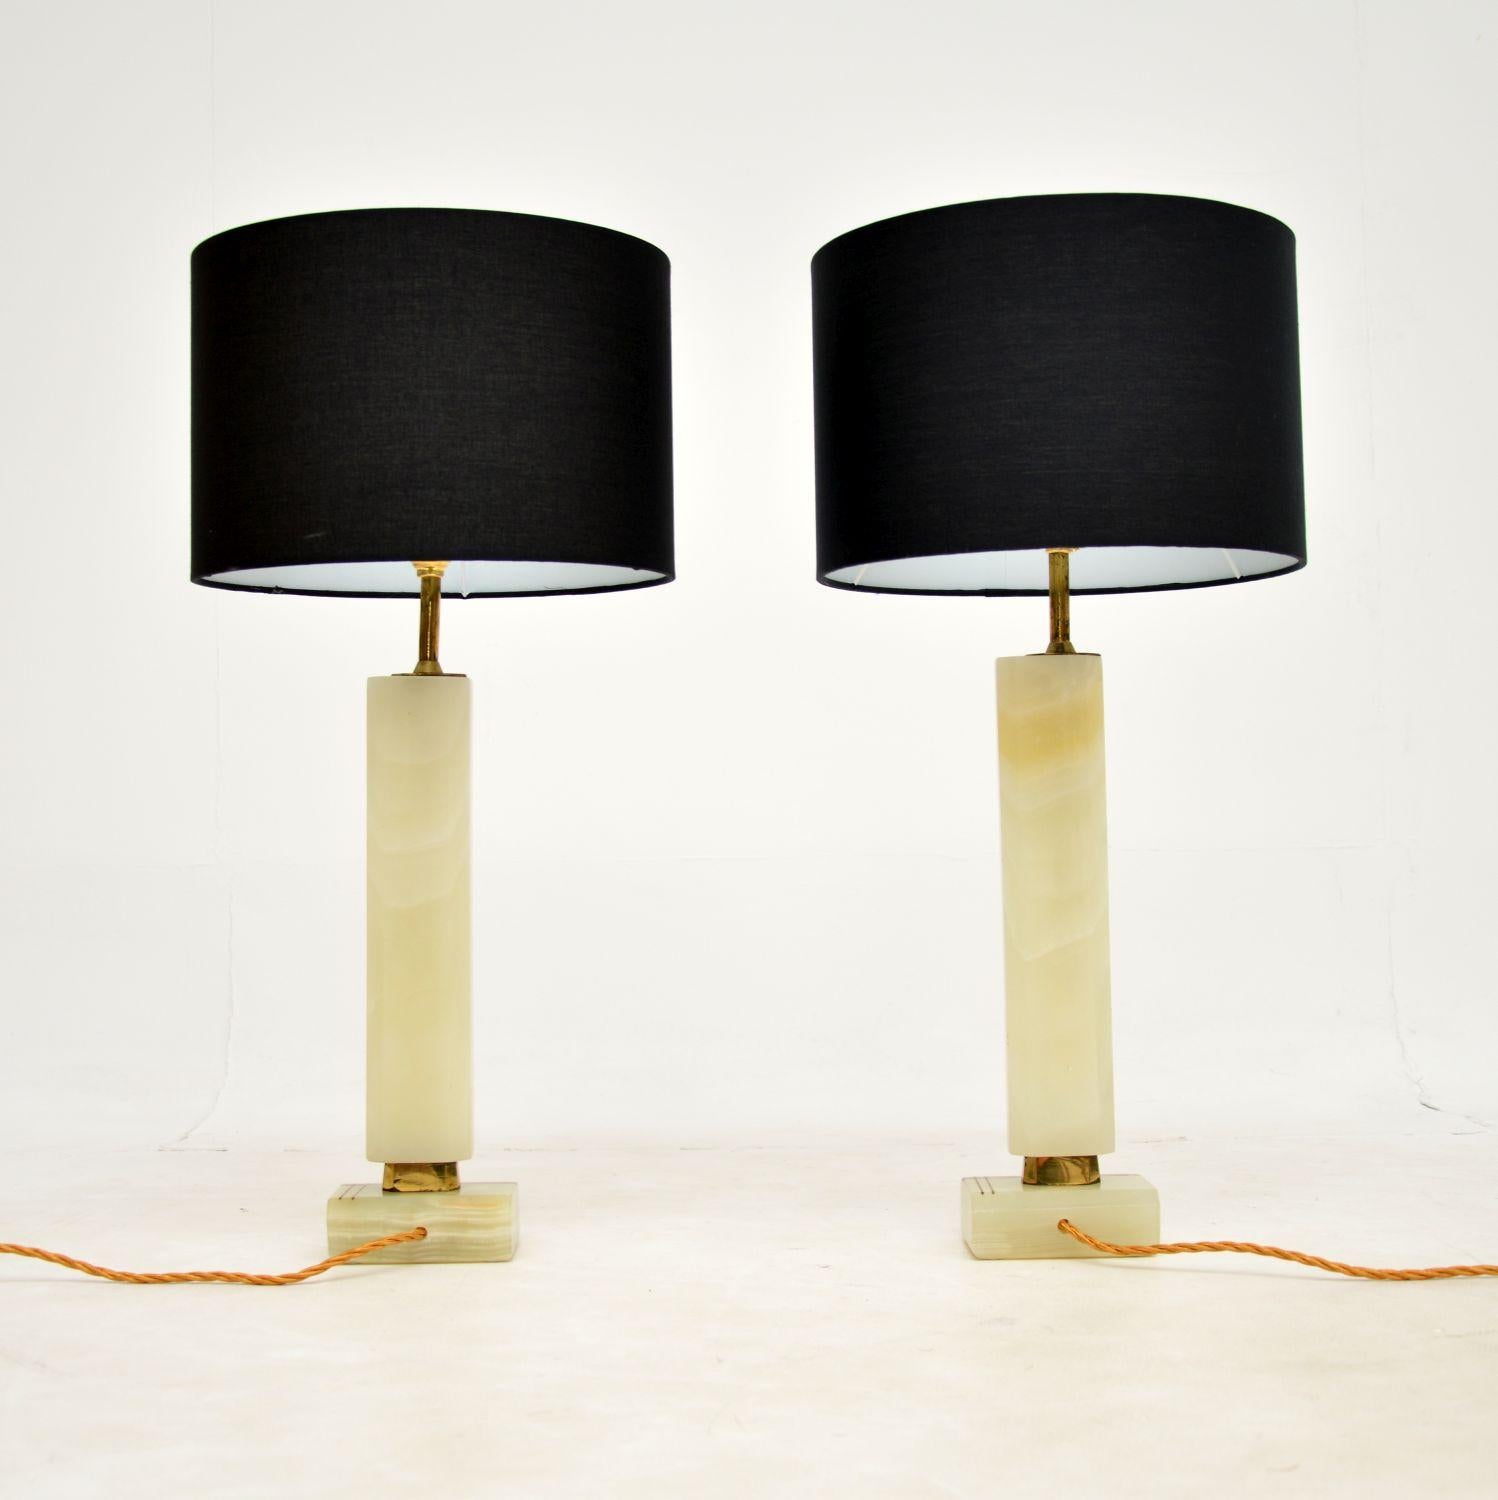 A stylish and very well made pair of vintage table lamps in solid onyx and brass. They were made in France, and date from the 1960-1970s.

The quality is superb, the onyx has beautiful colours and patterns. They have inlaid brass geometric lines,